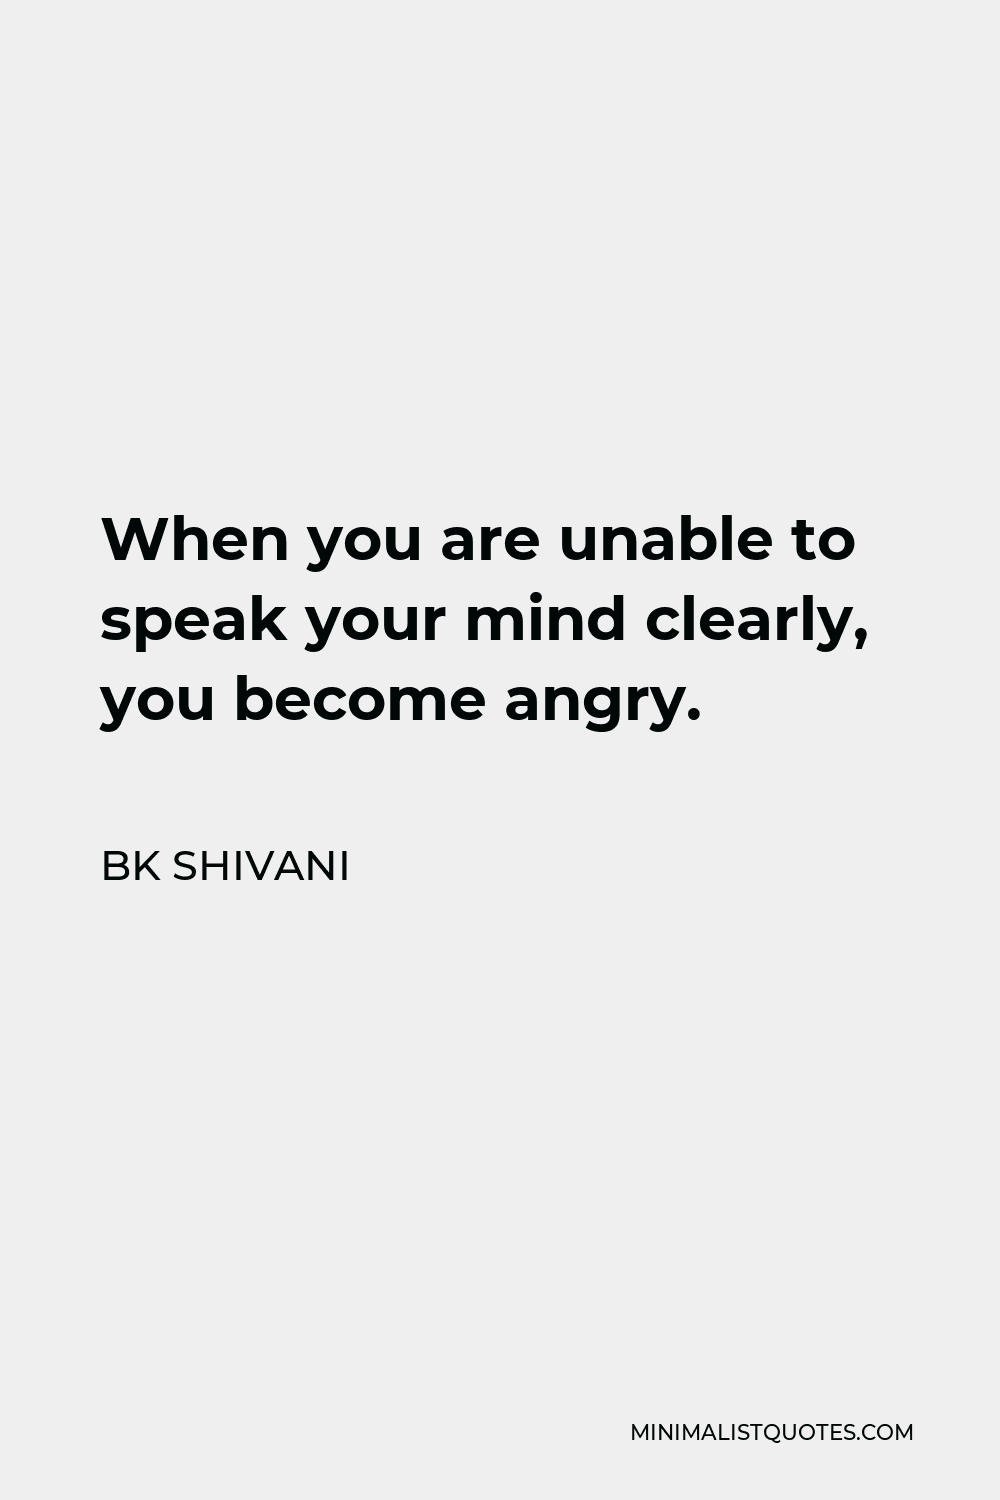 BK Shivani Quote - When you are unable to speak your mind clearly, you become angry.